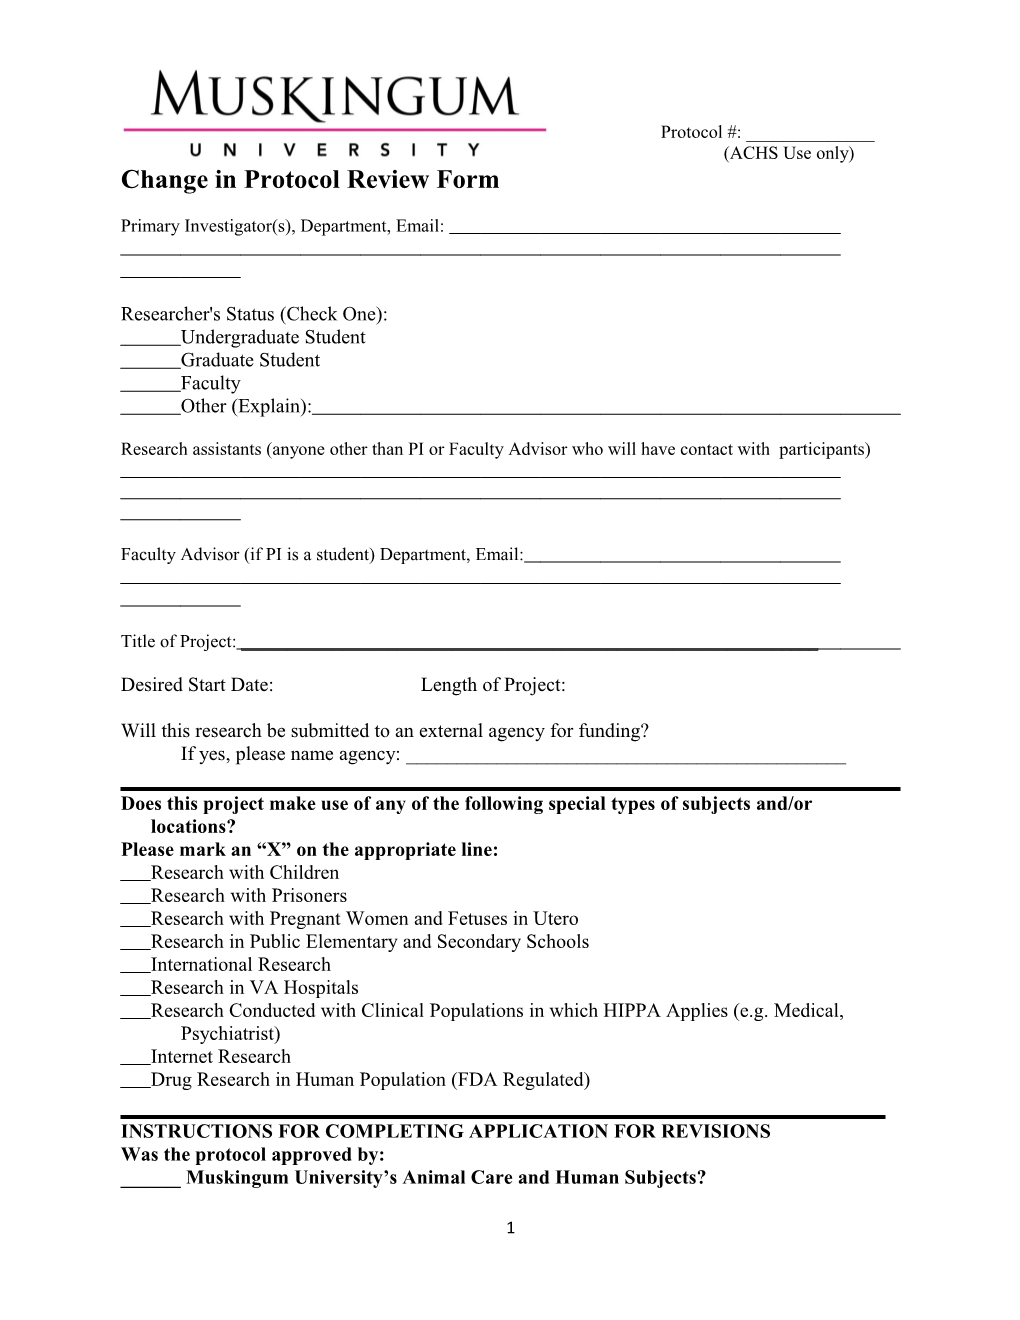 Change in Protocol Review Form